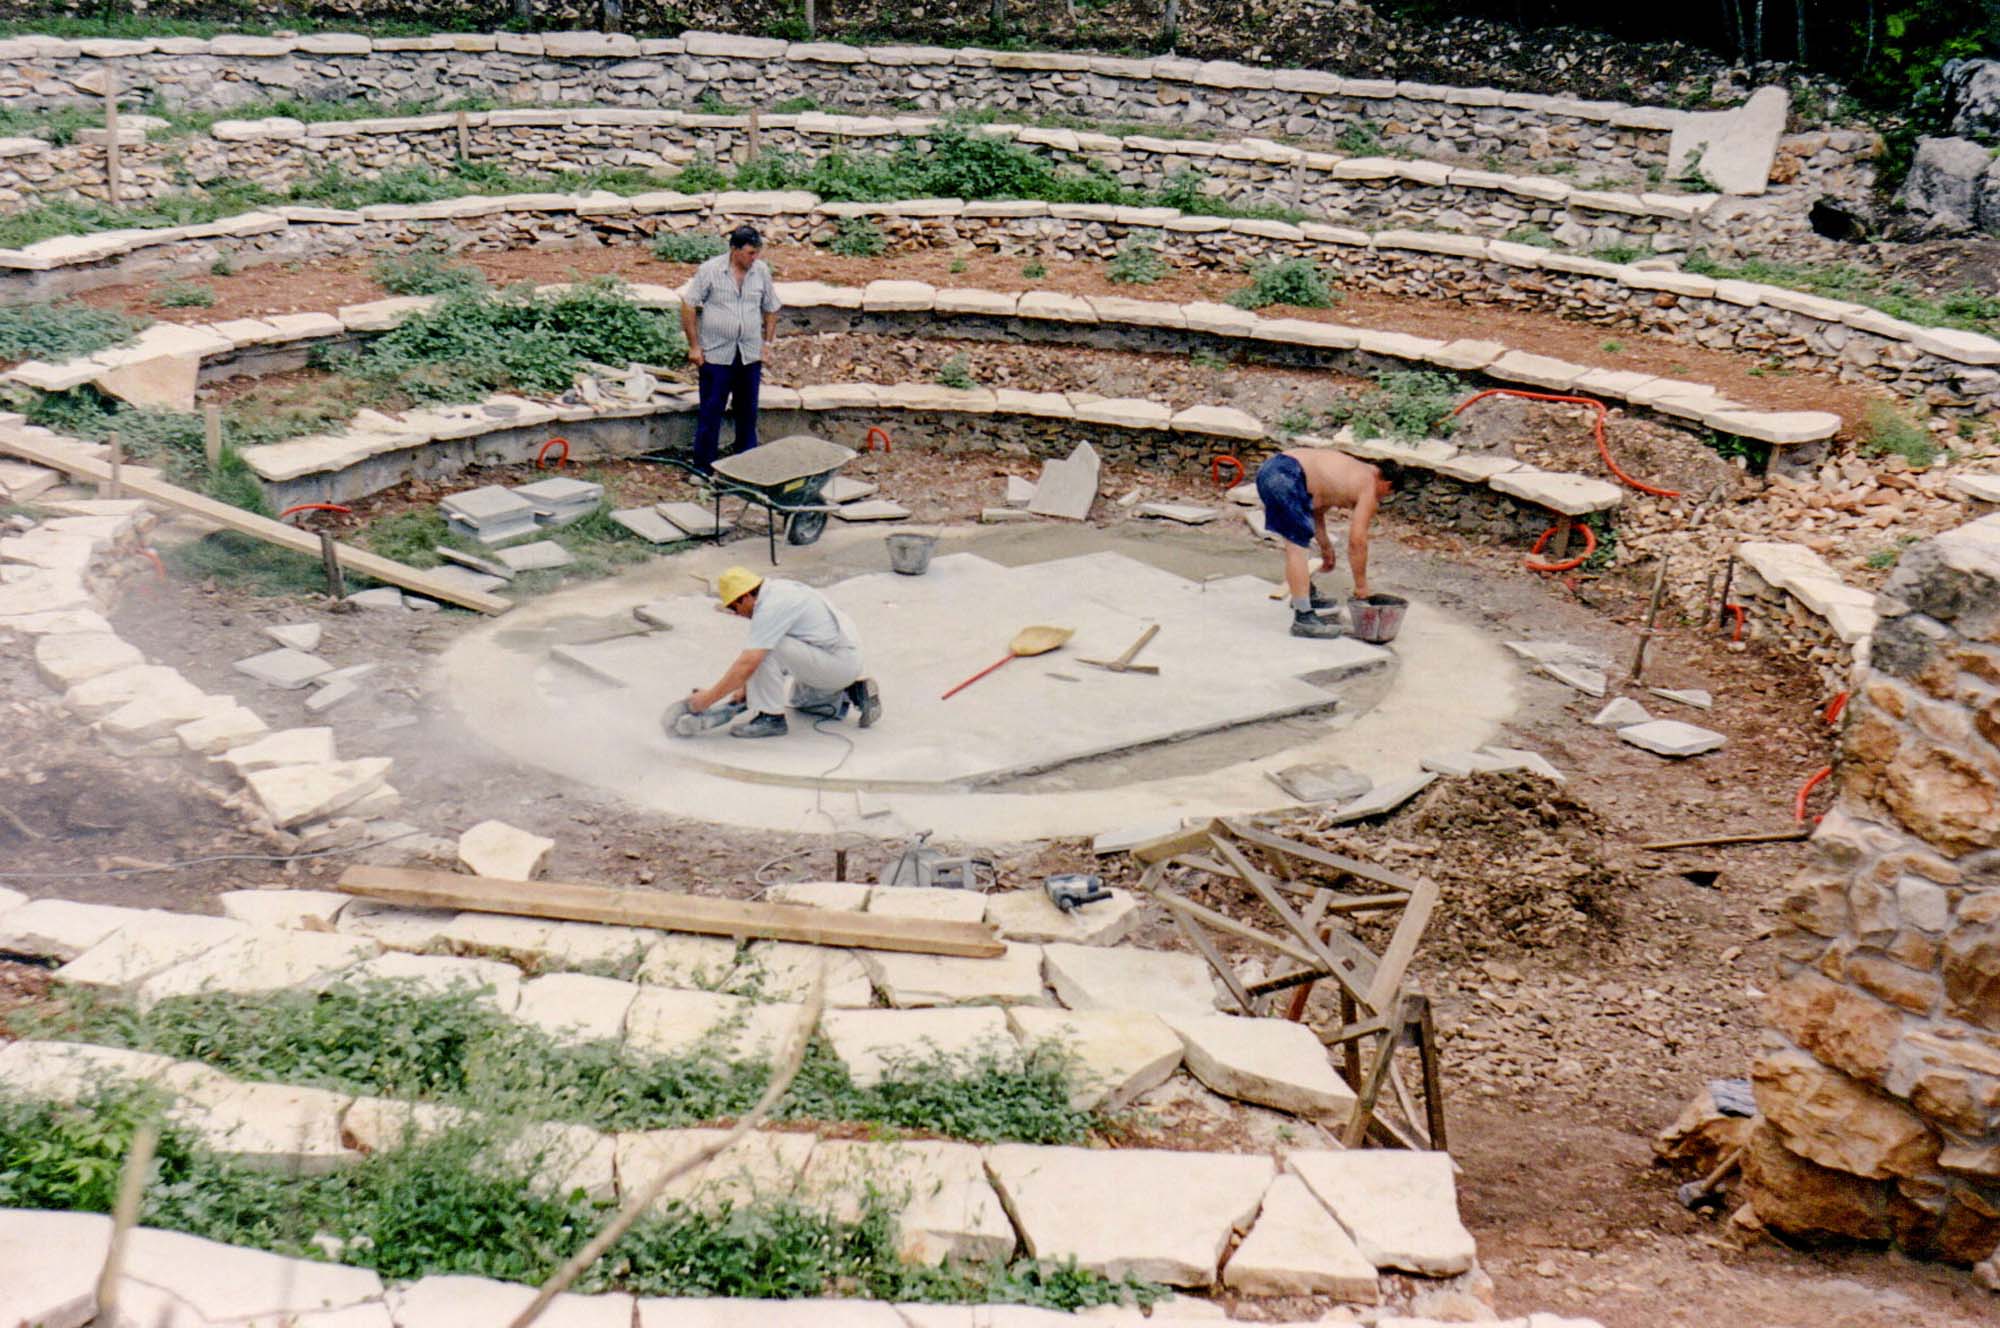 The "Dolac" amphitheater